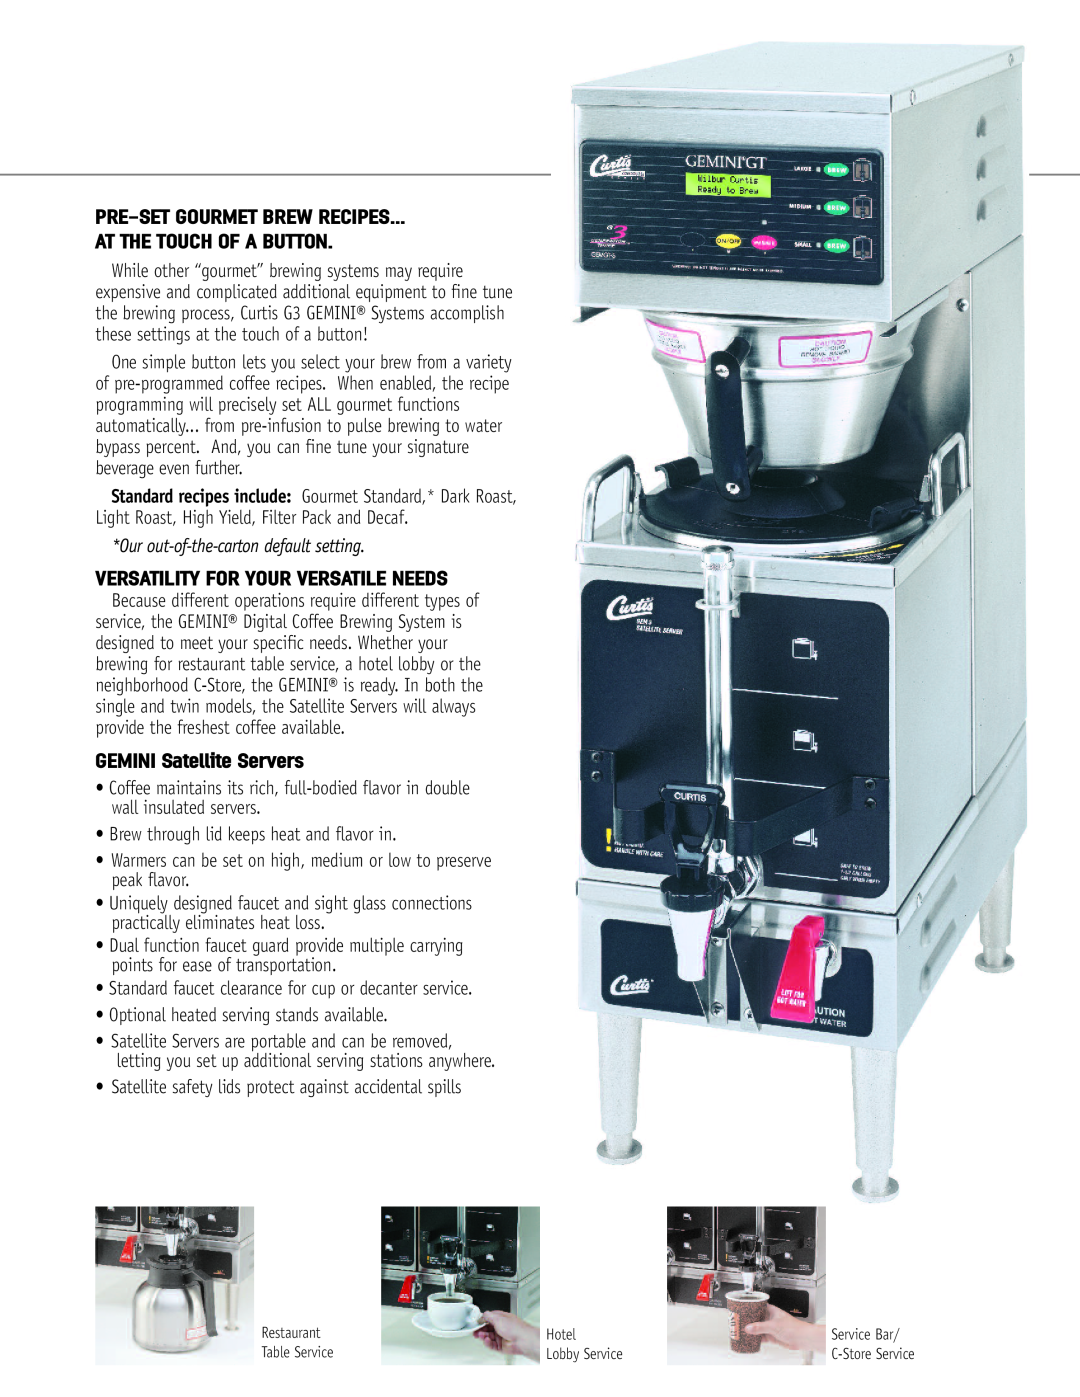 Wibur Curtis Company EMTS TWIN Pre-Setgourmet Brew Recipes, At The Touch Of A Button, Versatility For Your Versatile Needs 